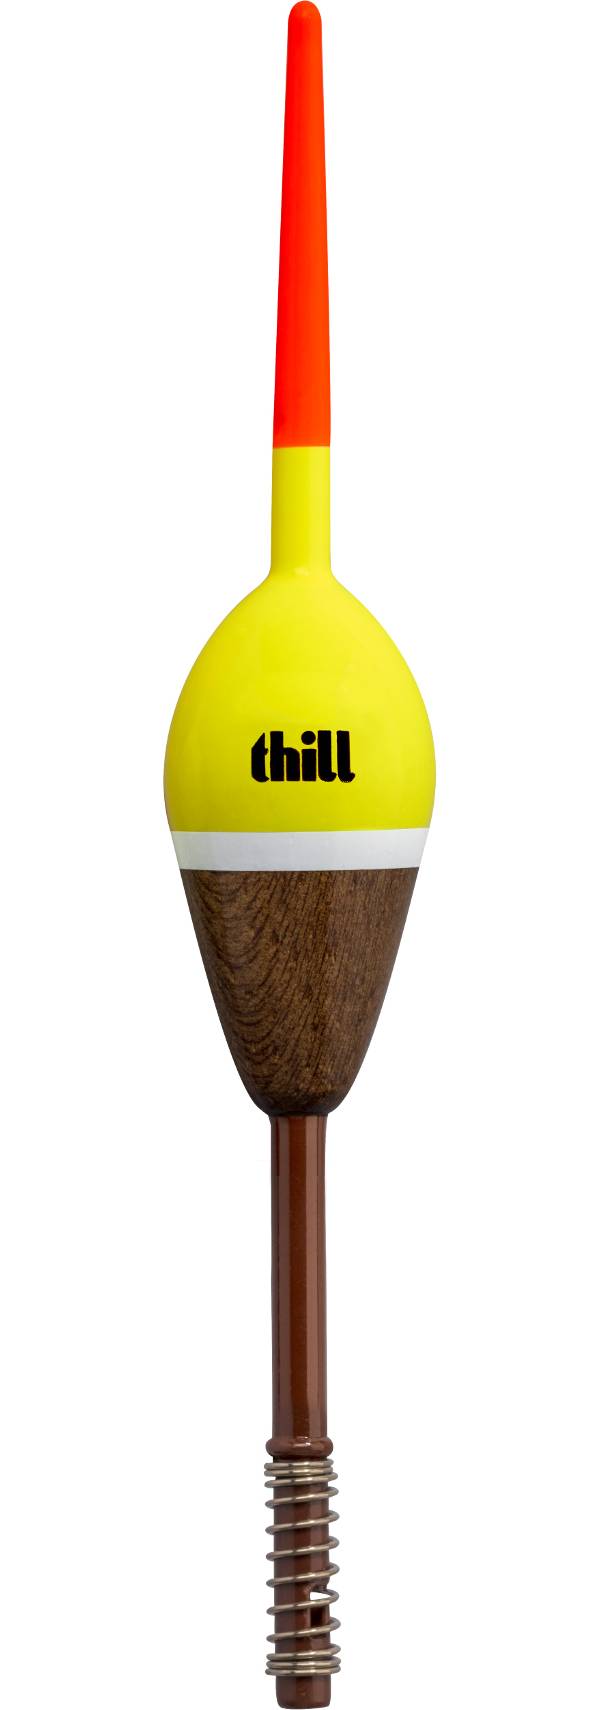 Thill America's Classic Oval Shape Float product image